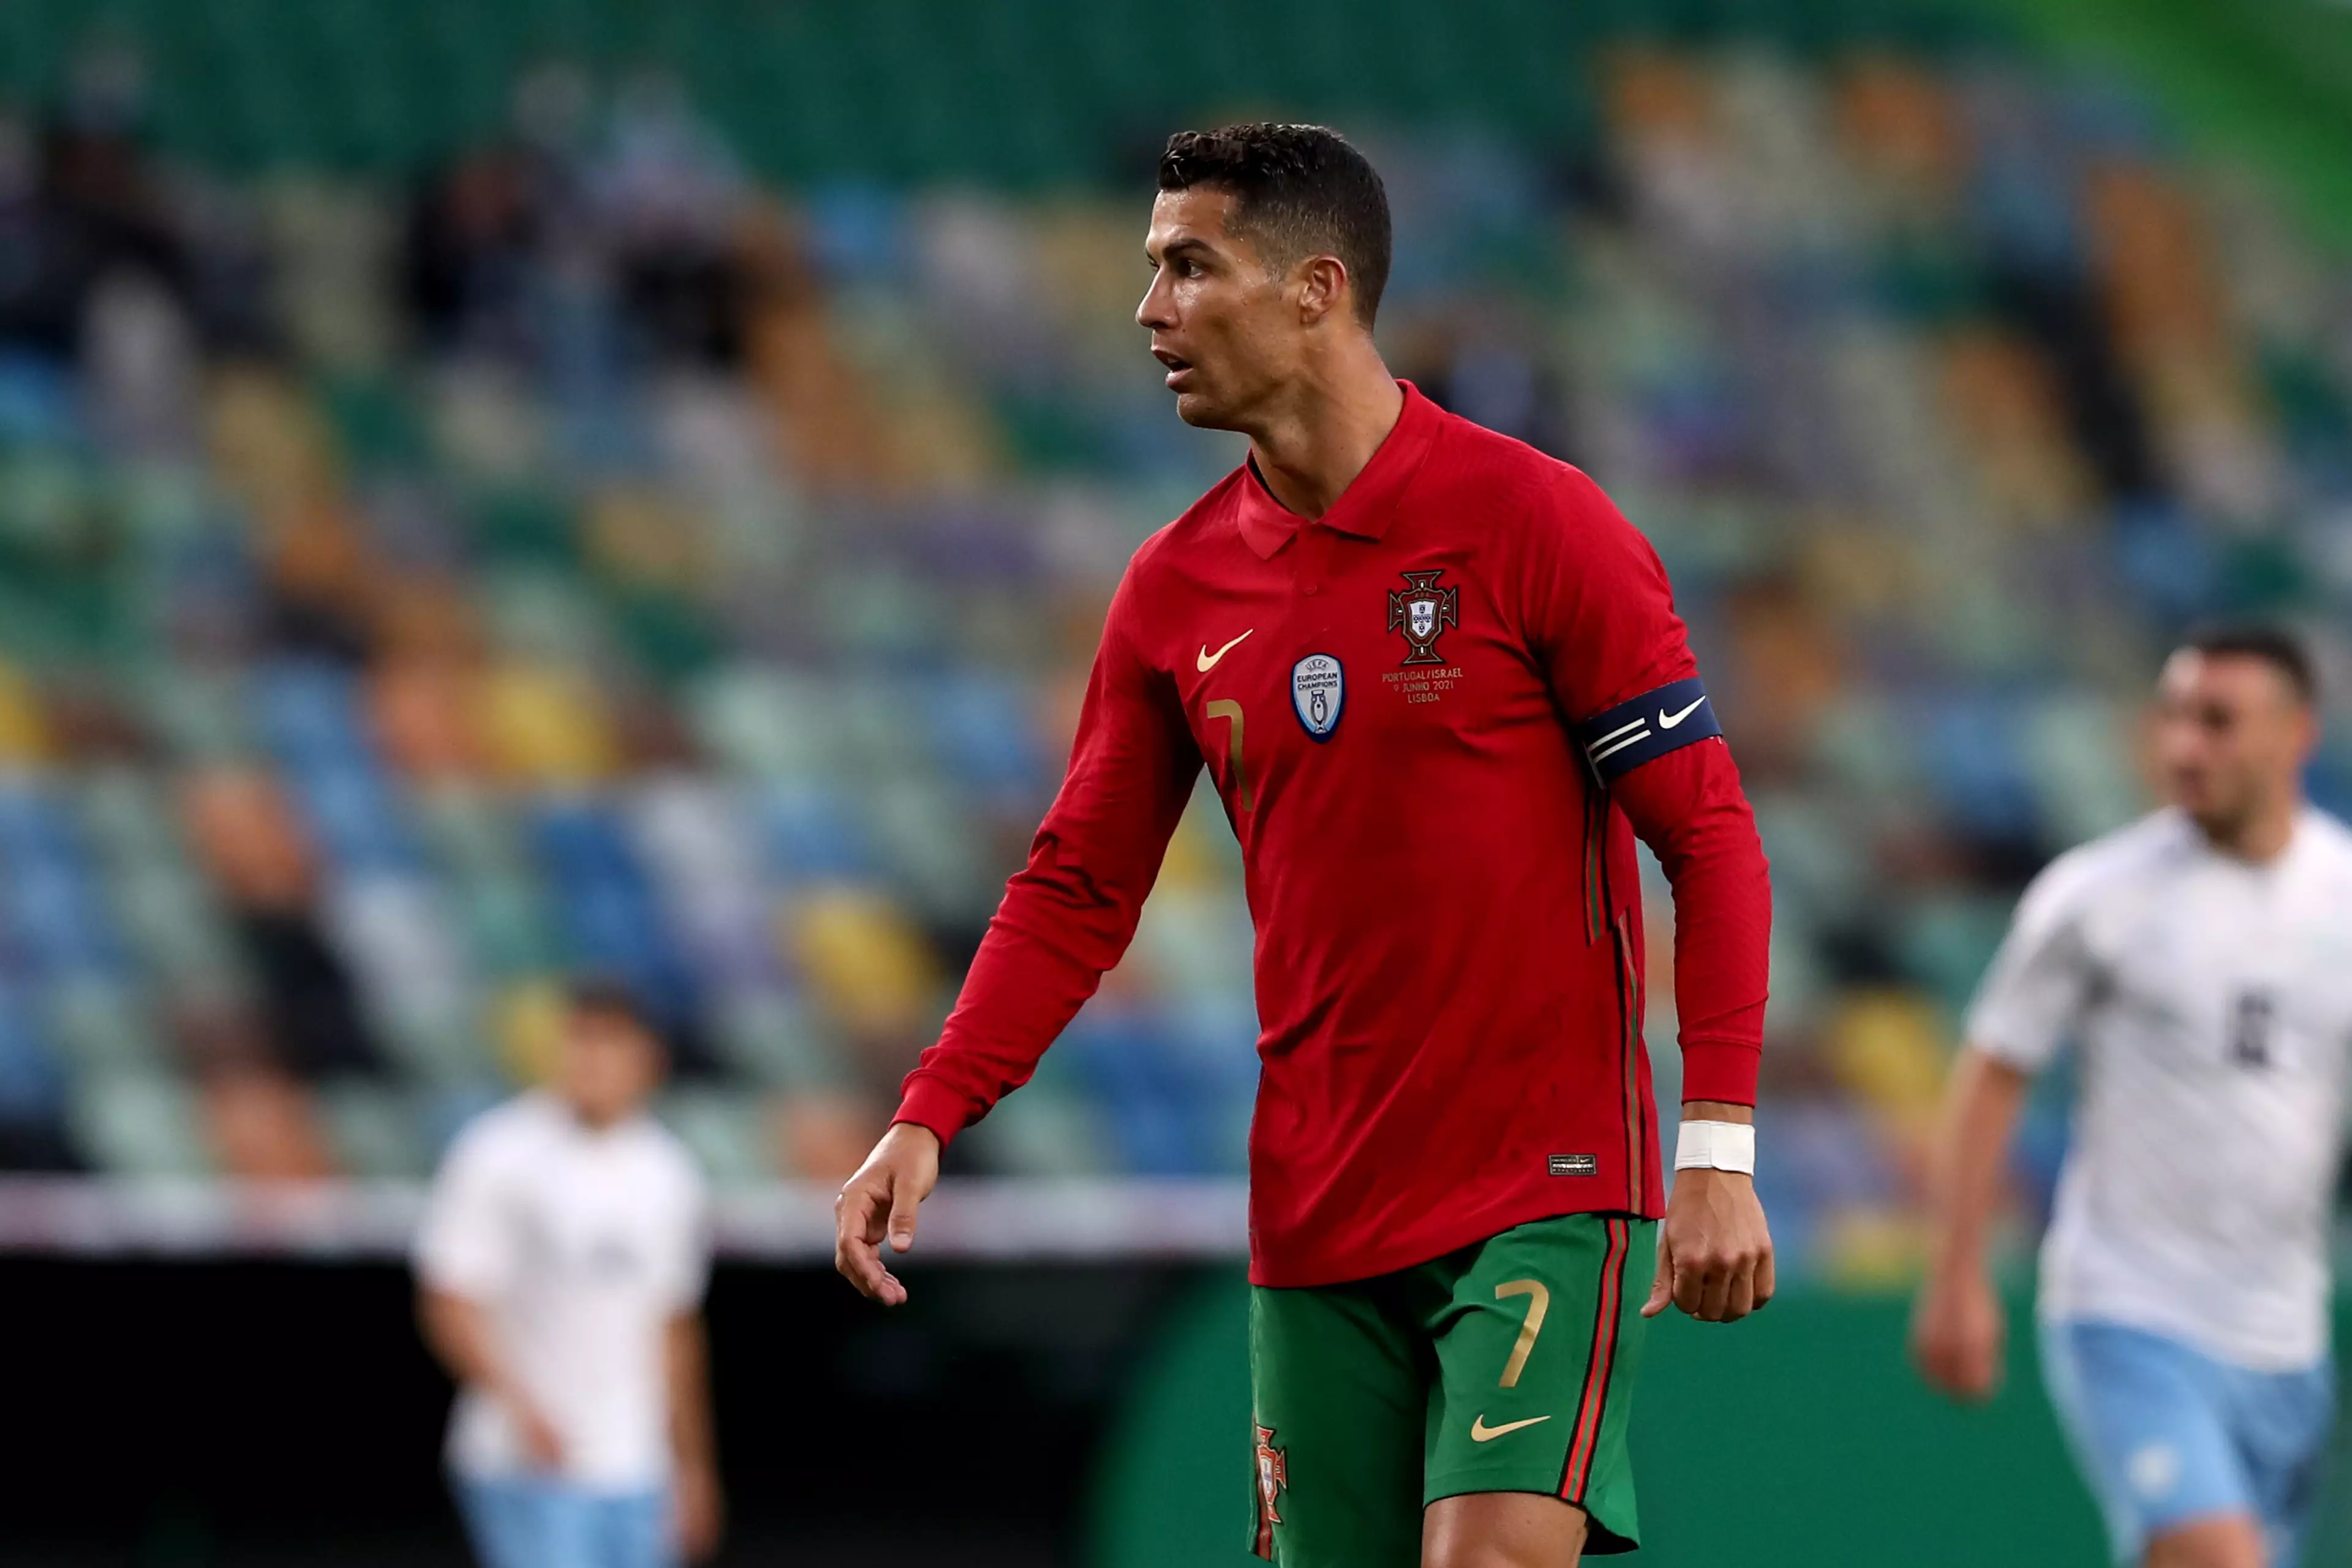 Cristiano Ronaldo needs just six more goals to become the all-time scorer in men's international football